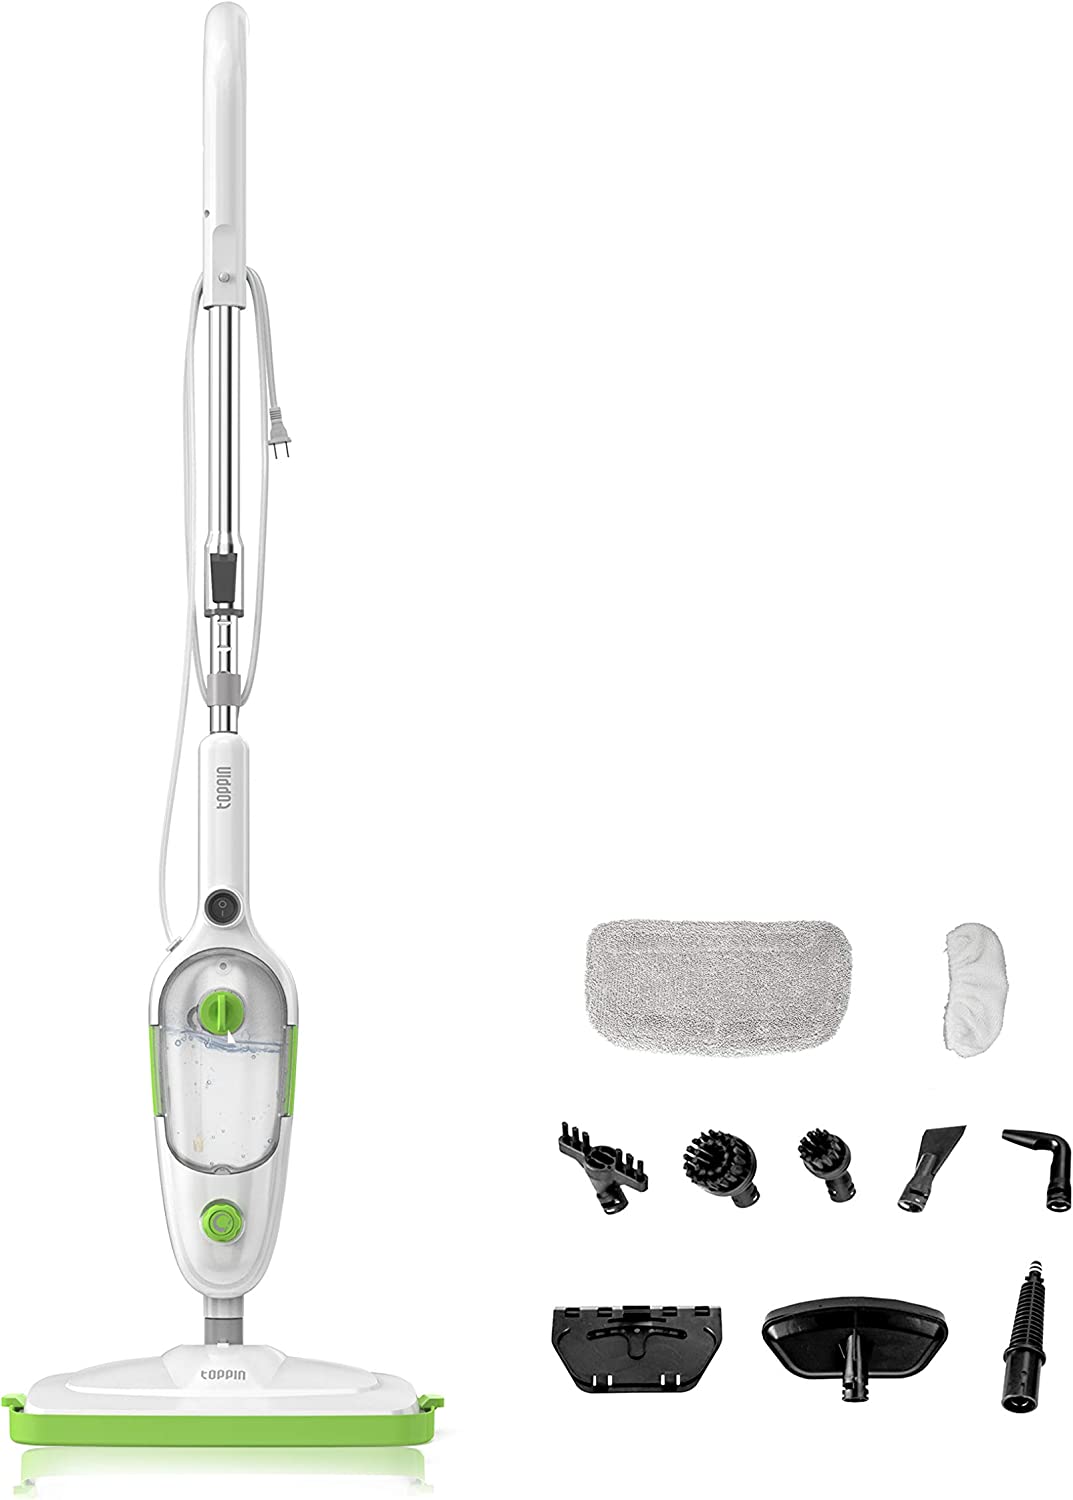 48586 - TOPPIN Steam Mop - 10 in 1 Detachable Handheld Steam Cleaner with 2 Pads USA